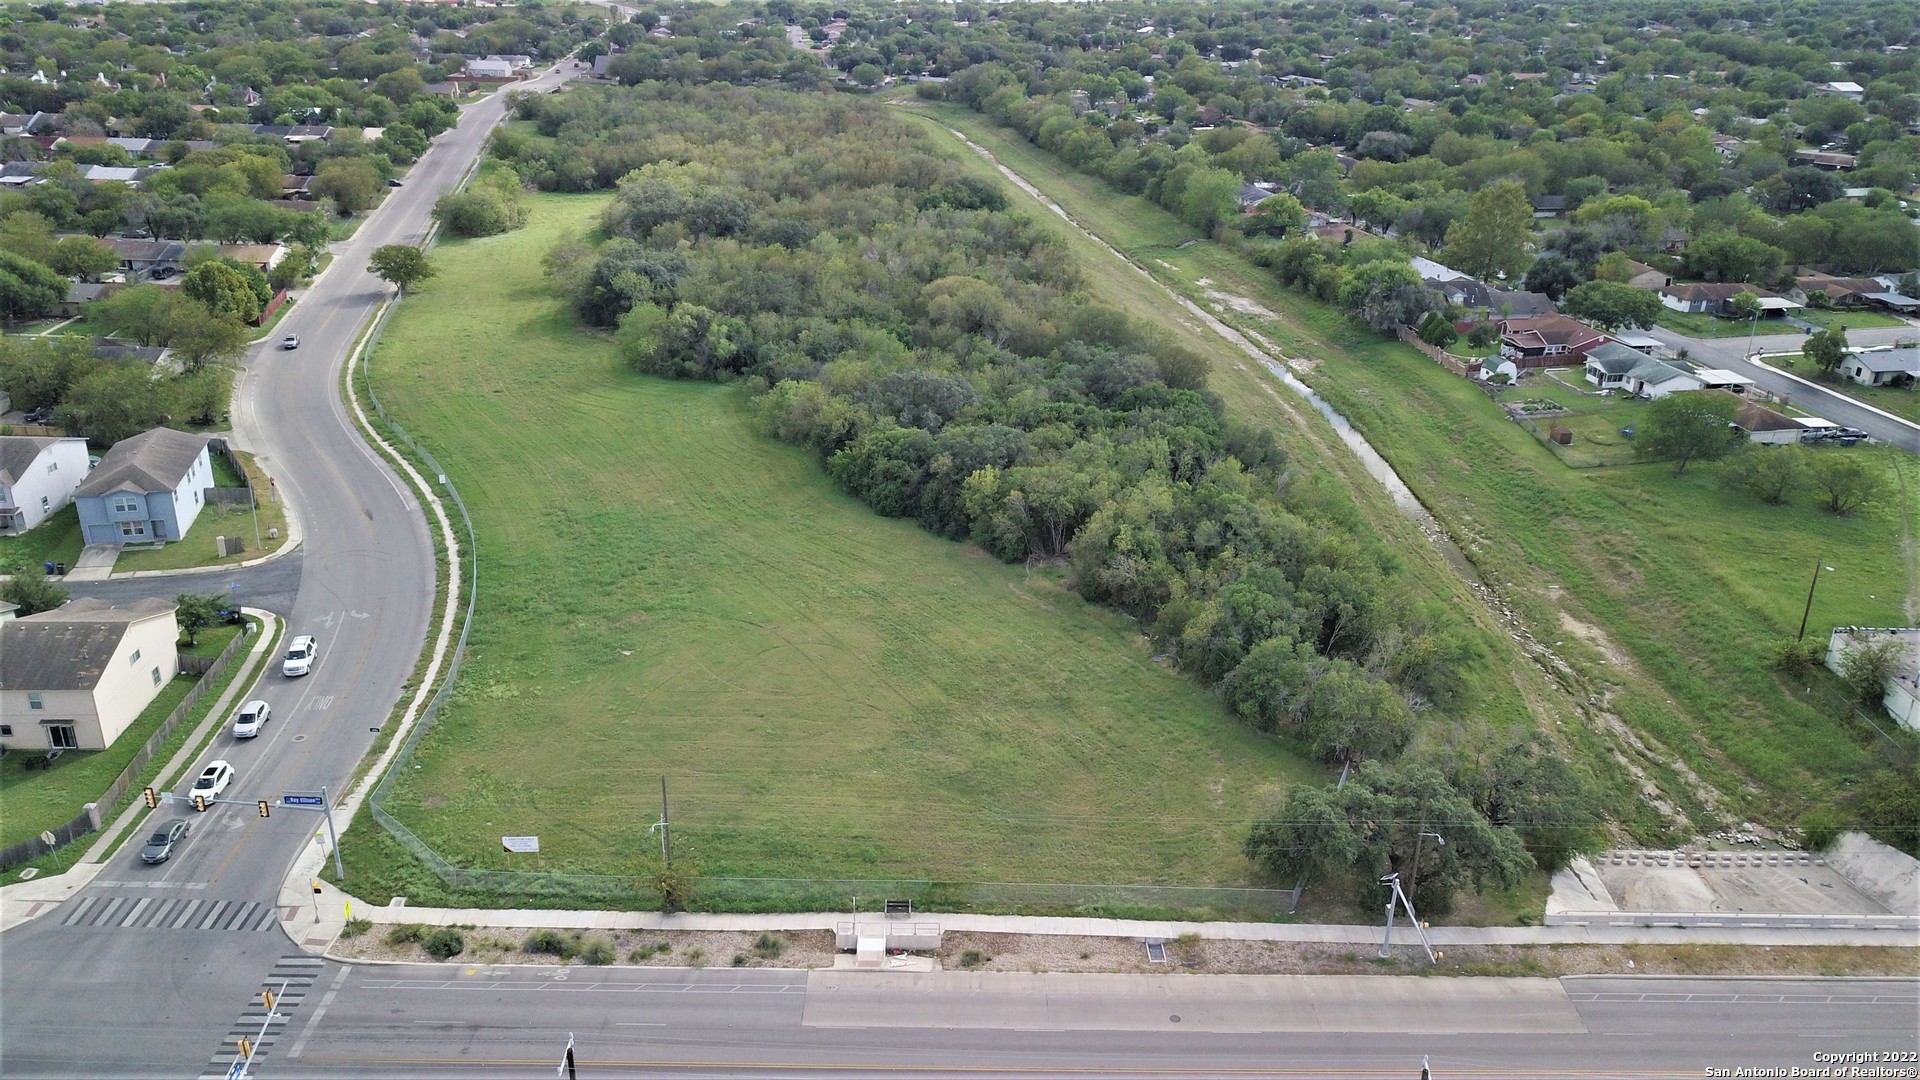 Great Commercial and Residential investment opportunity ** Corner Lot with zoning Type C2/RM-4 Existing available project accepted by the city Come and take advantage of this prime Lot of investment opportunity as the market continues to flourish in this area